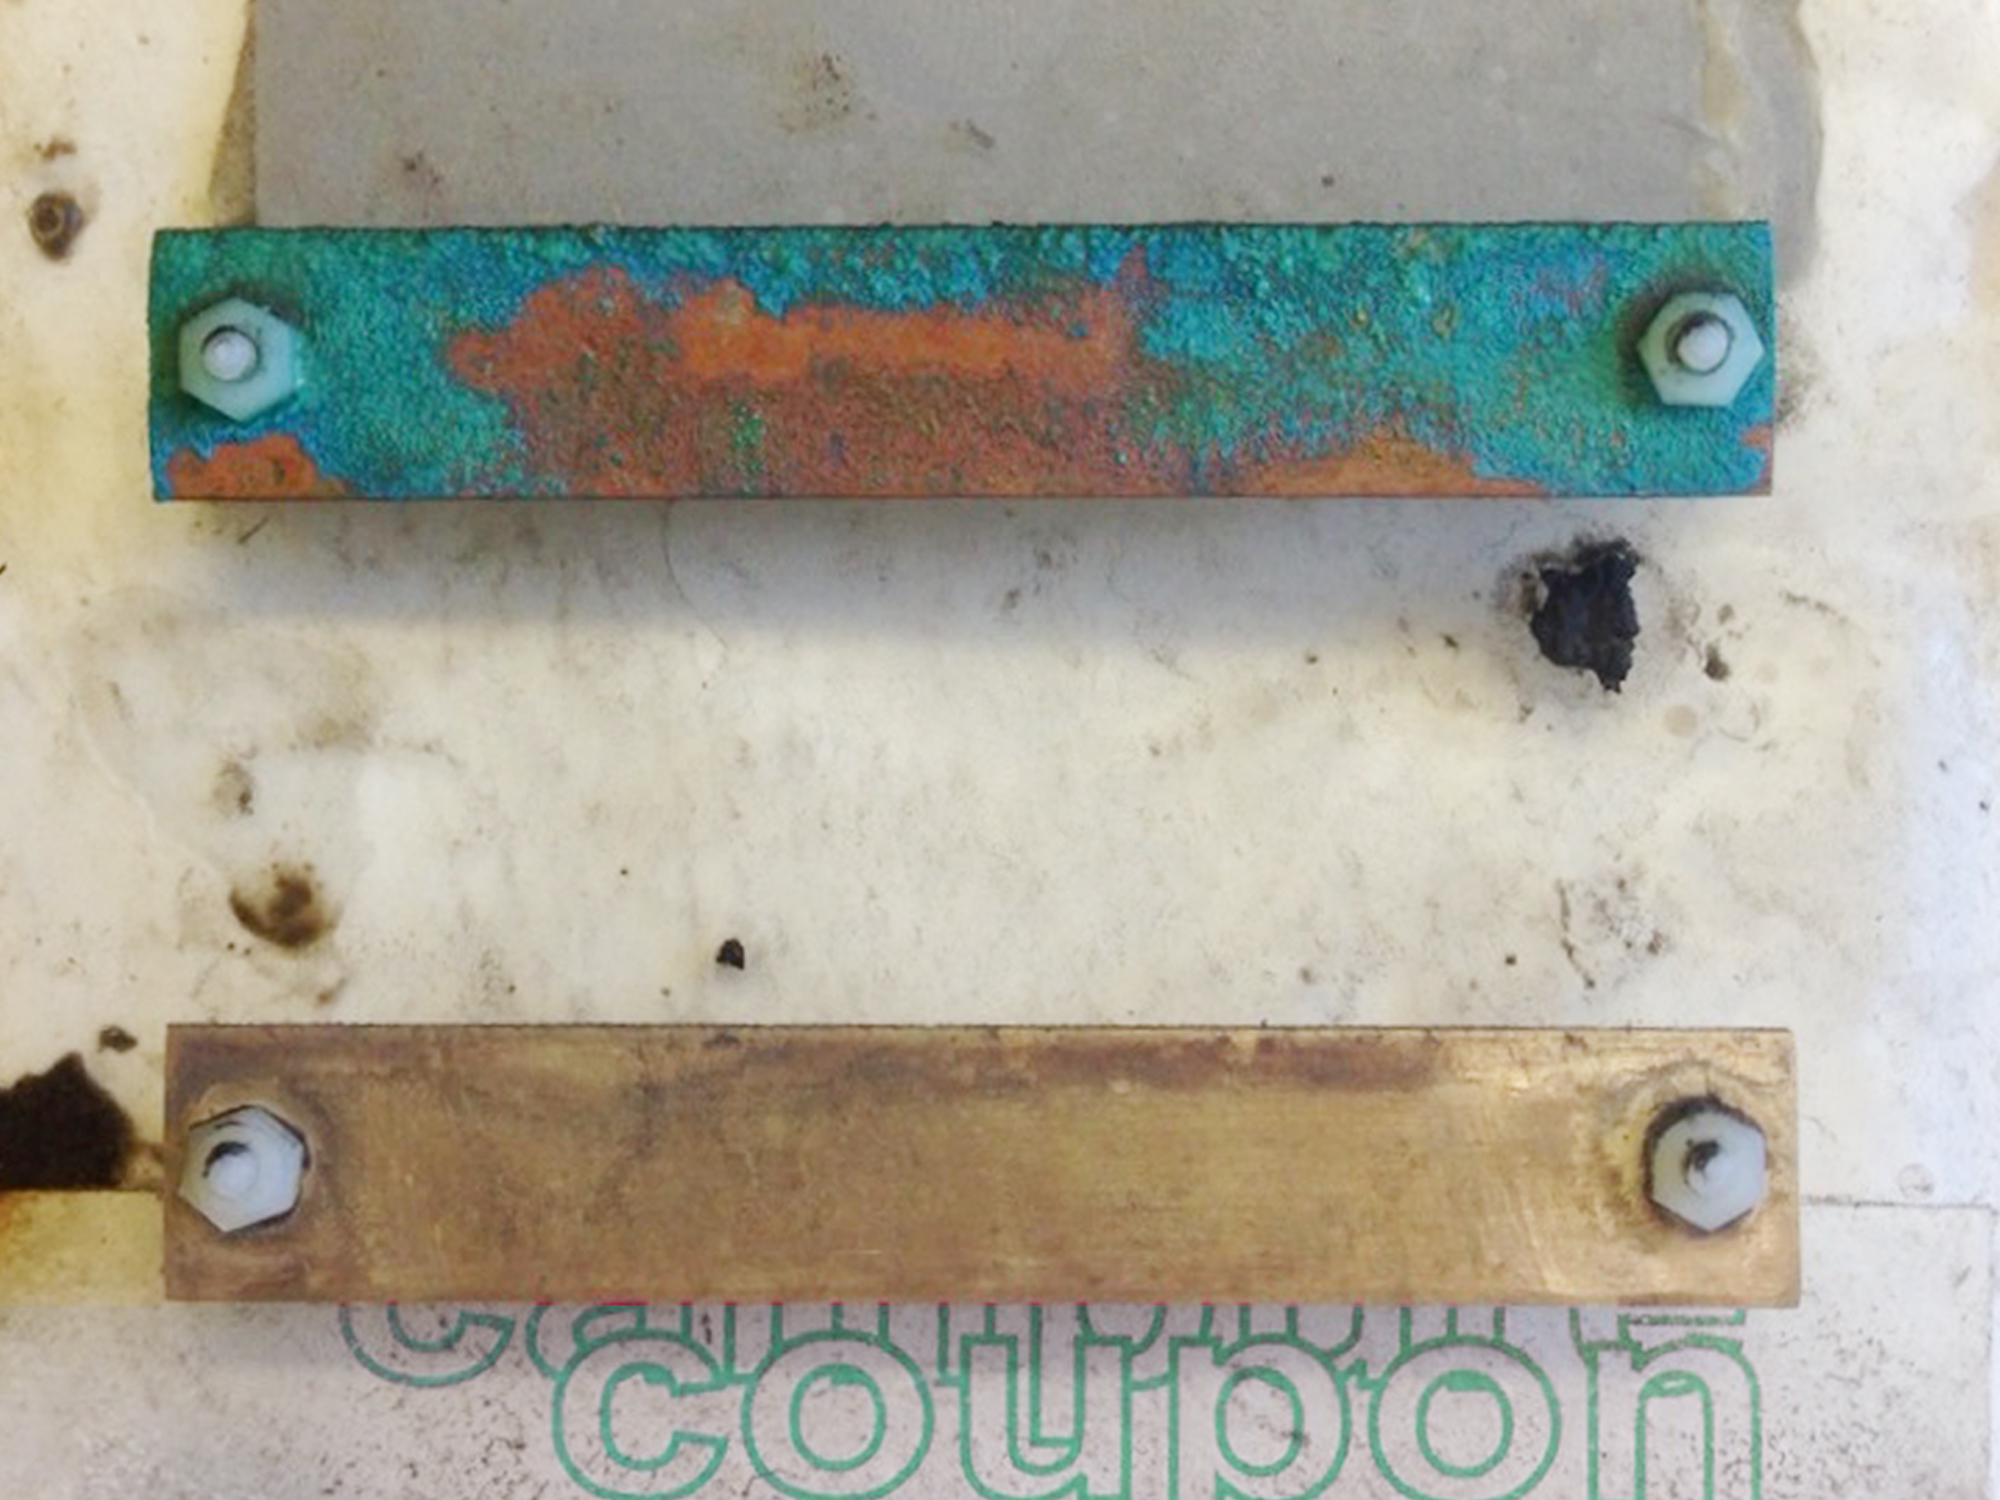 Corrosion Coupons